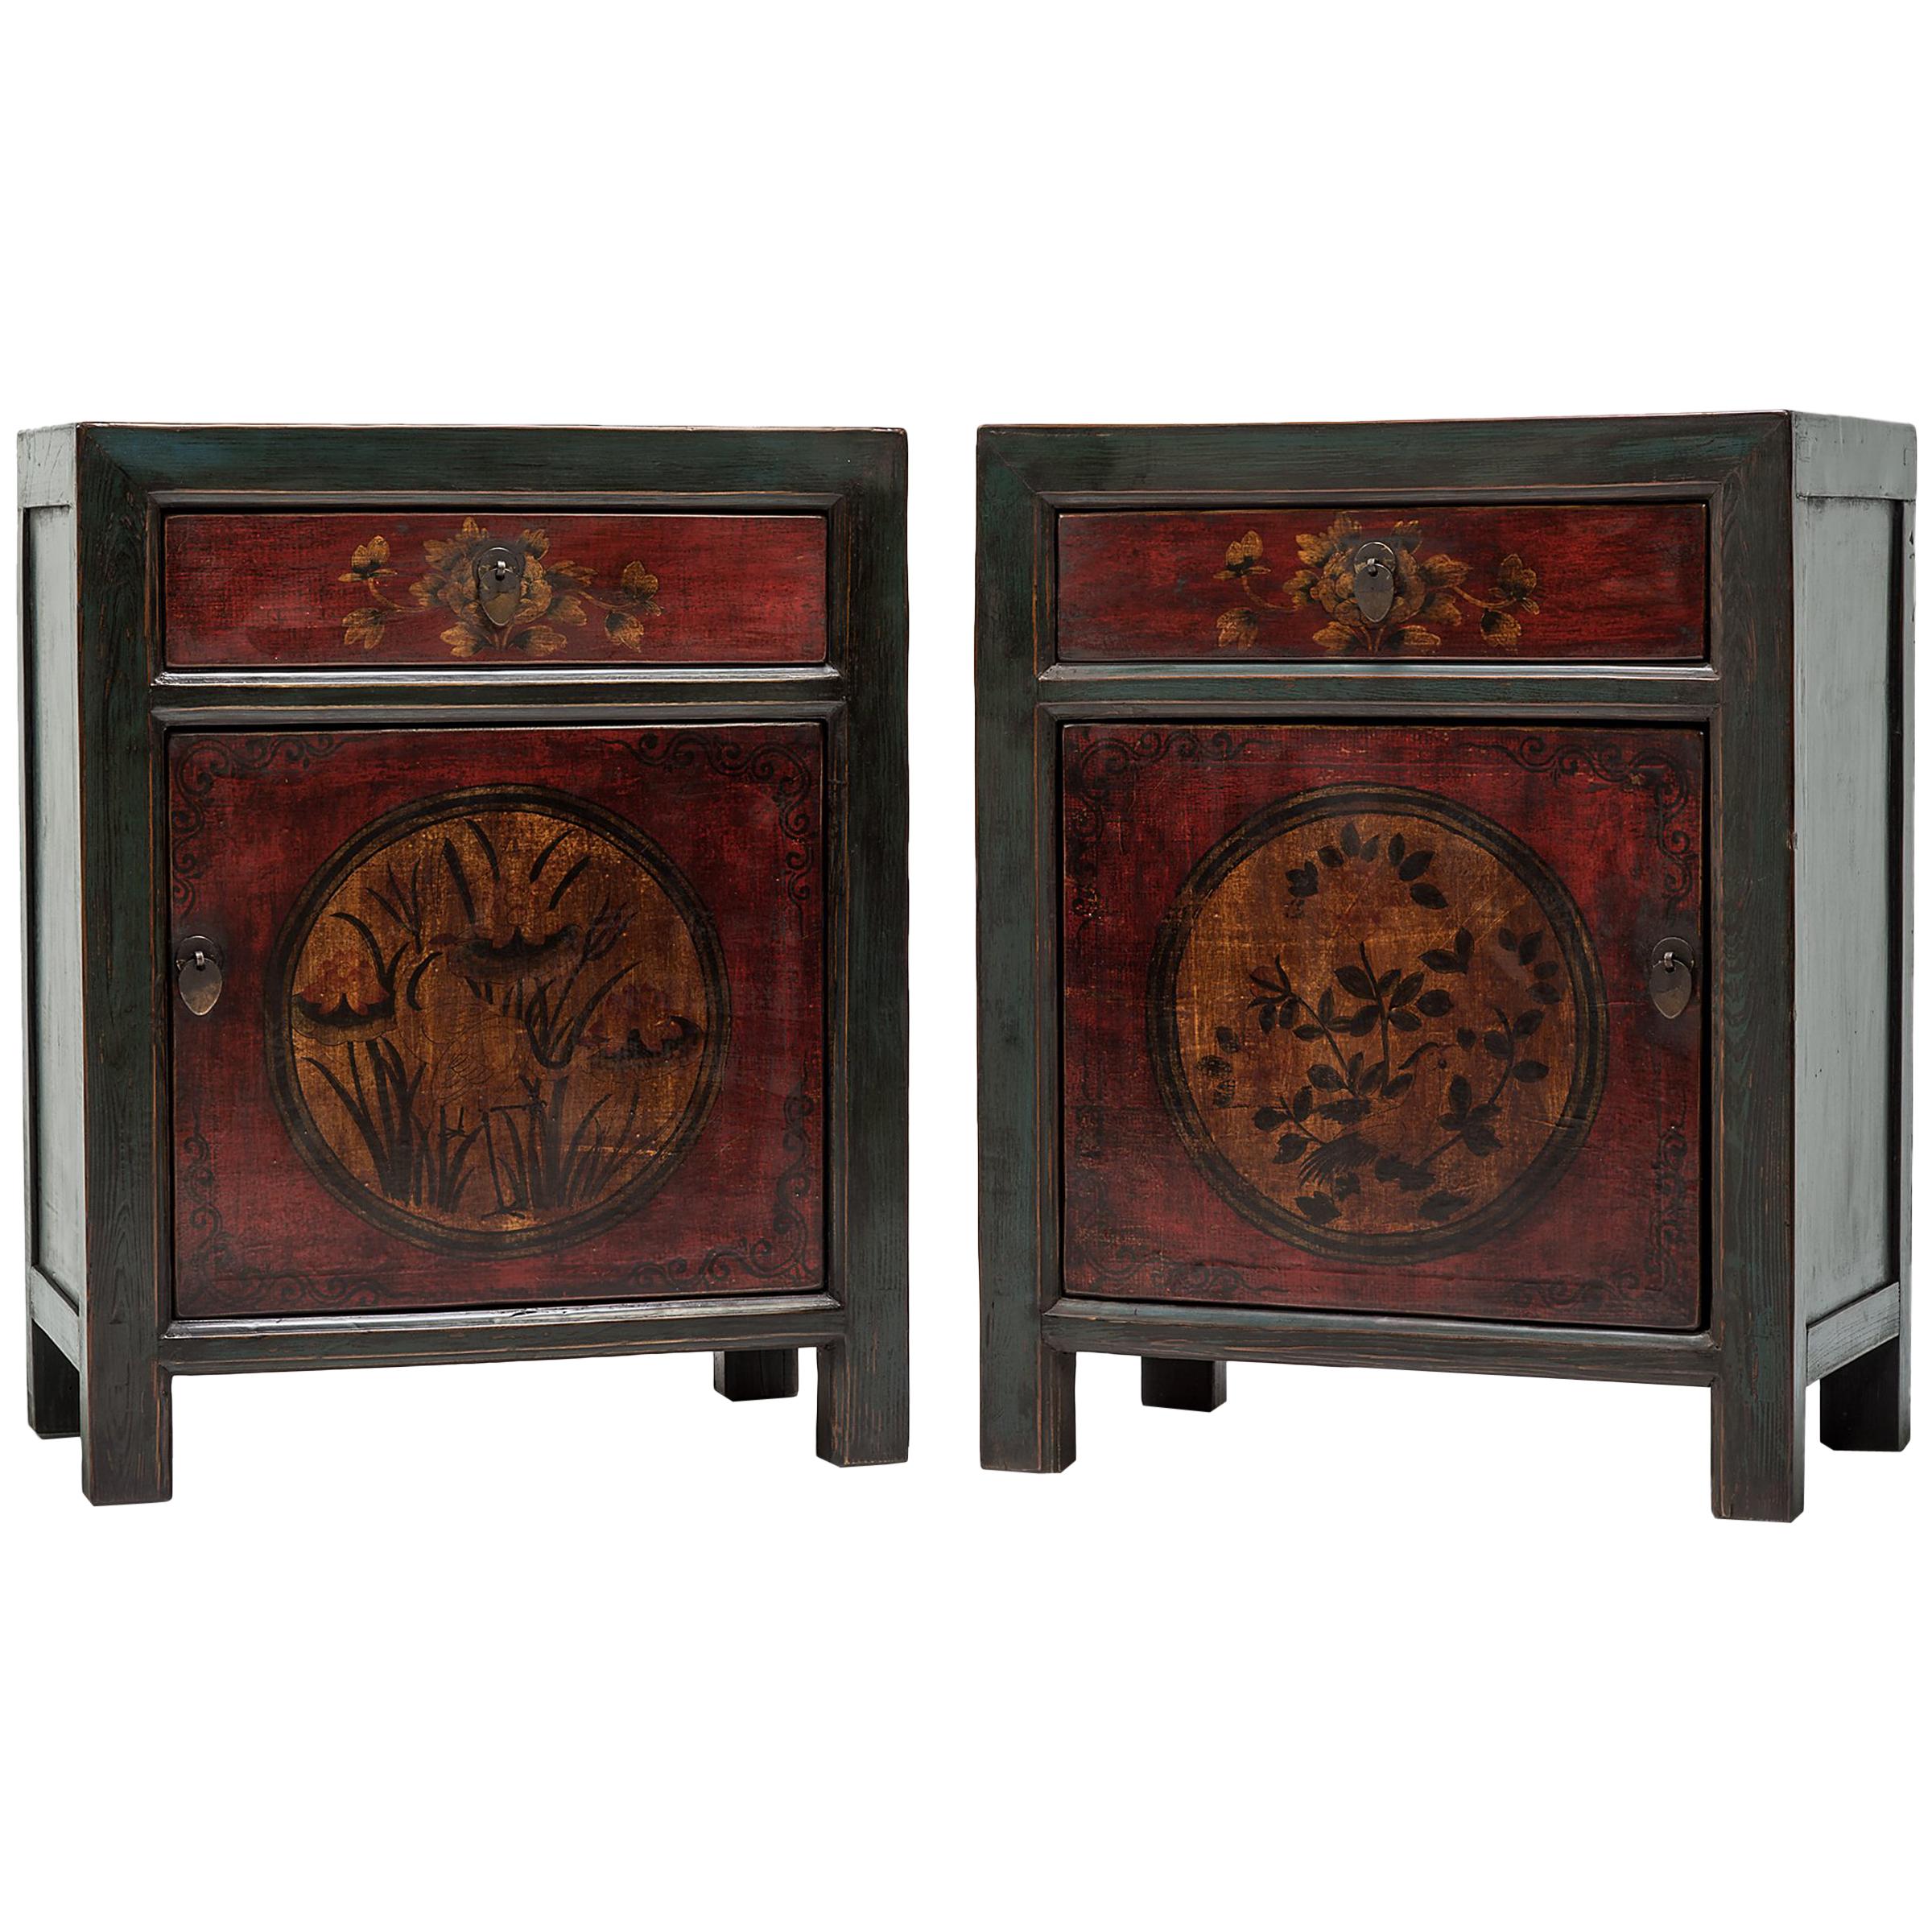 Pair of Mongolian Provincial Floral Chests